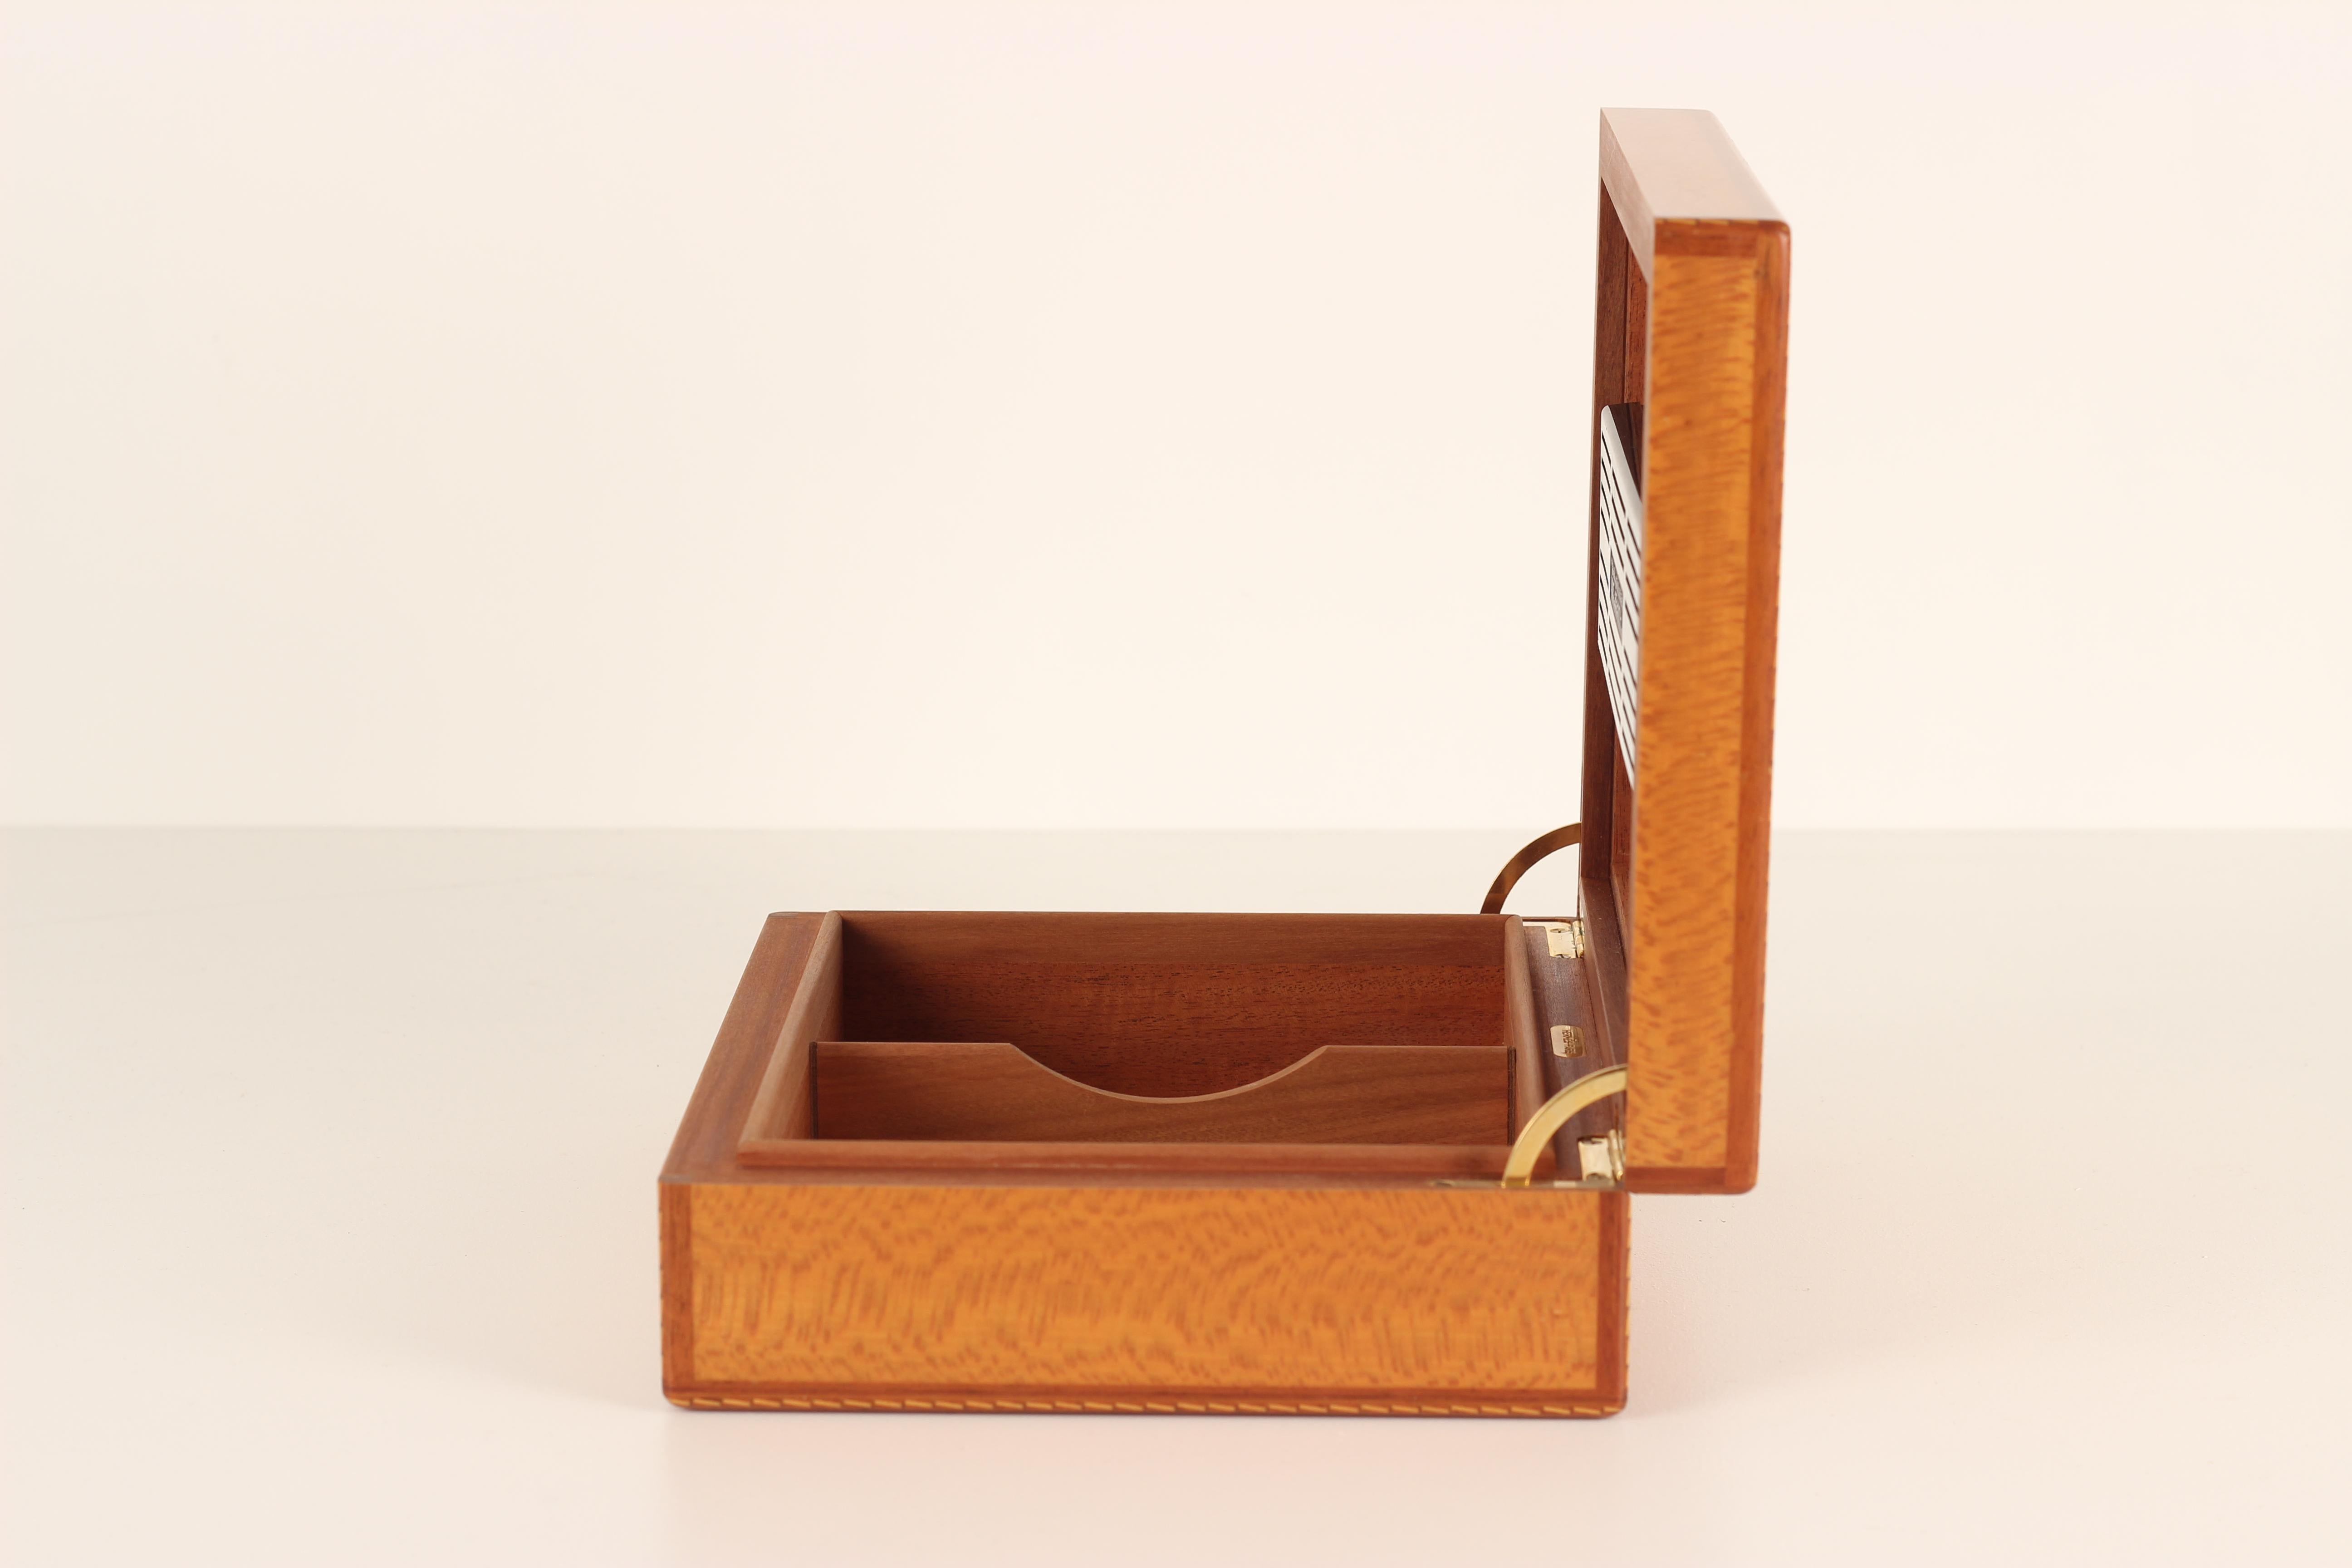 A hand made and crafted Hermes humidor or Cigar Box showing all the expressions, signs of detailing and fine craftsmanship we have come to expect from one of the leaders in understated and classic luxury from the House of Hermès. 

Produced in the